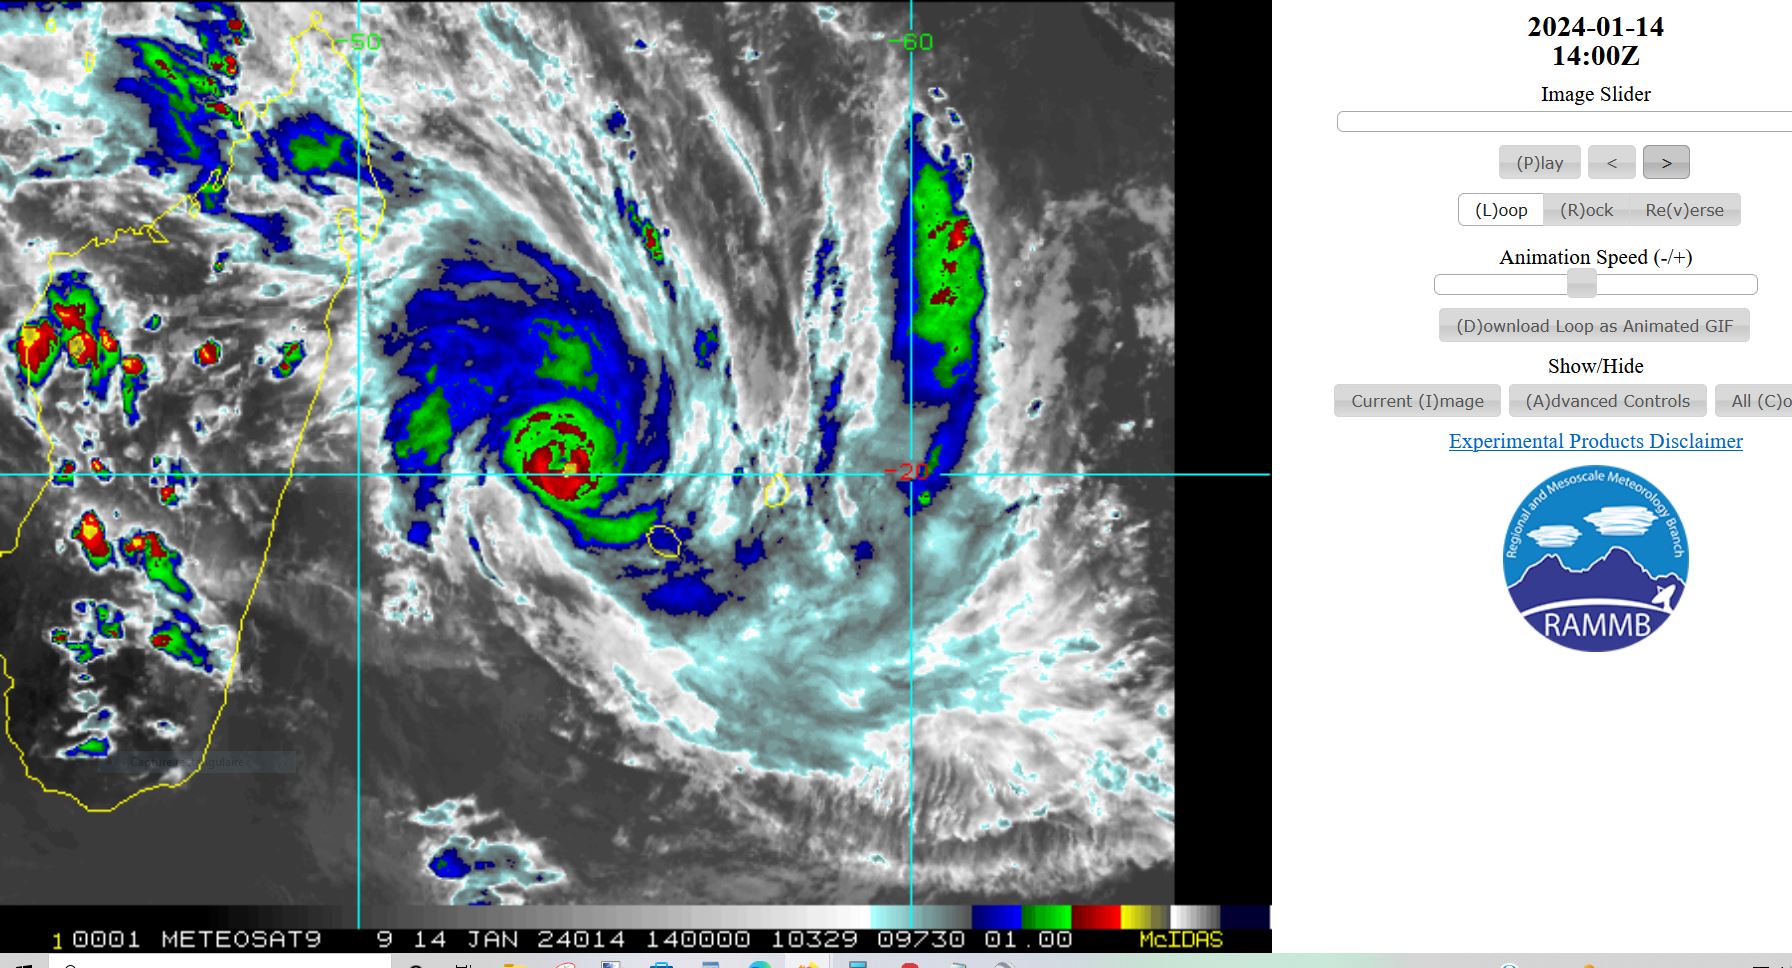 Intensifying TC 05S(BELAL) is forecast to track dangerously close to REUNION island(possibly over) by 24h// Invest 98S//Invest 99S//1415utc